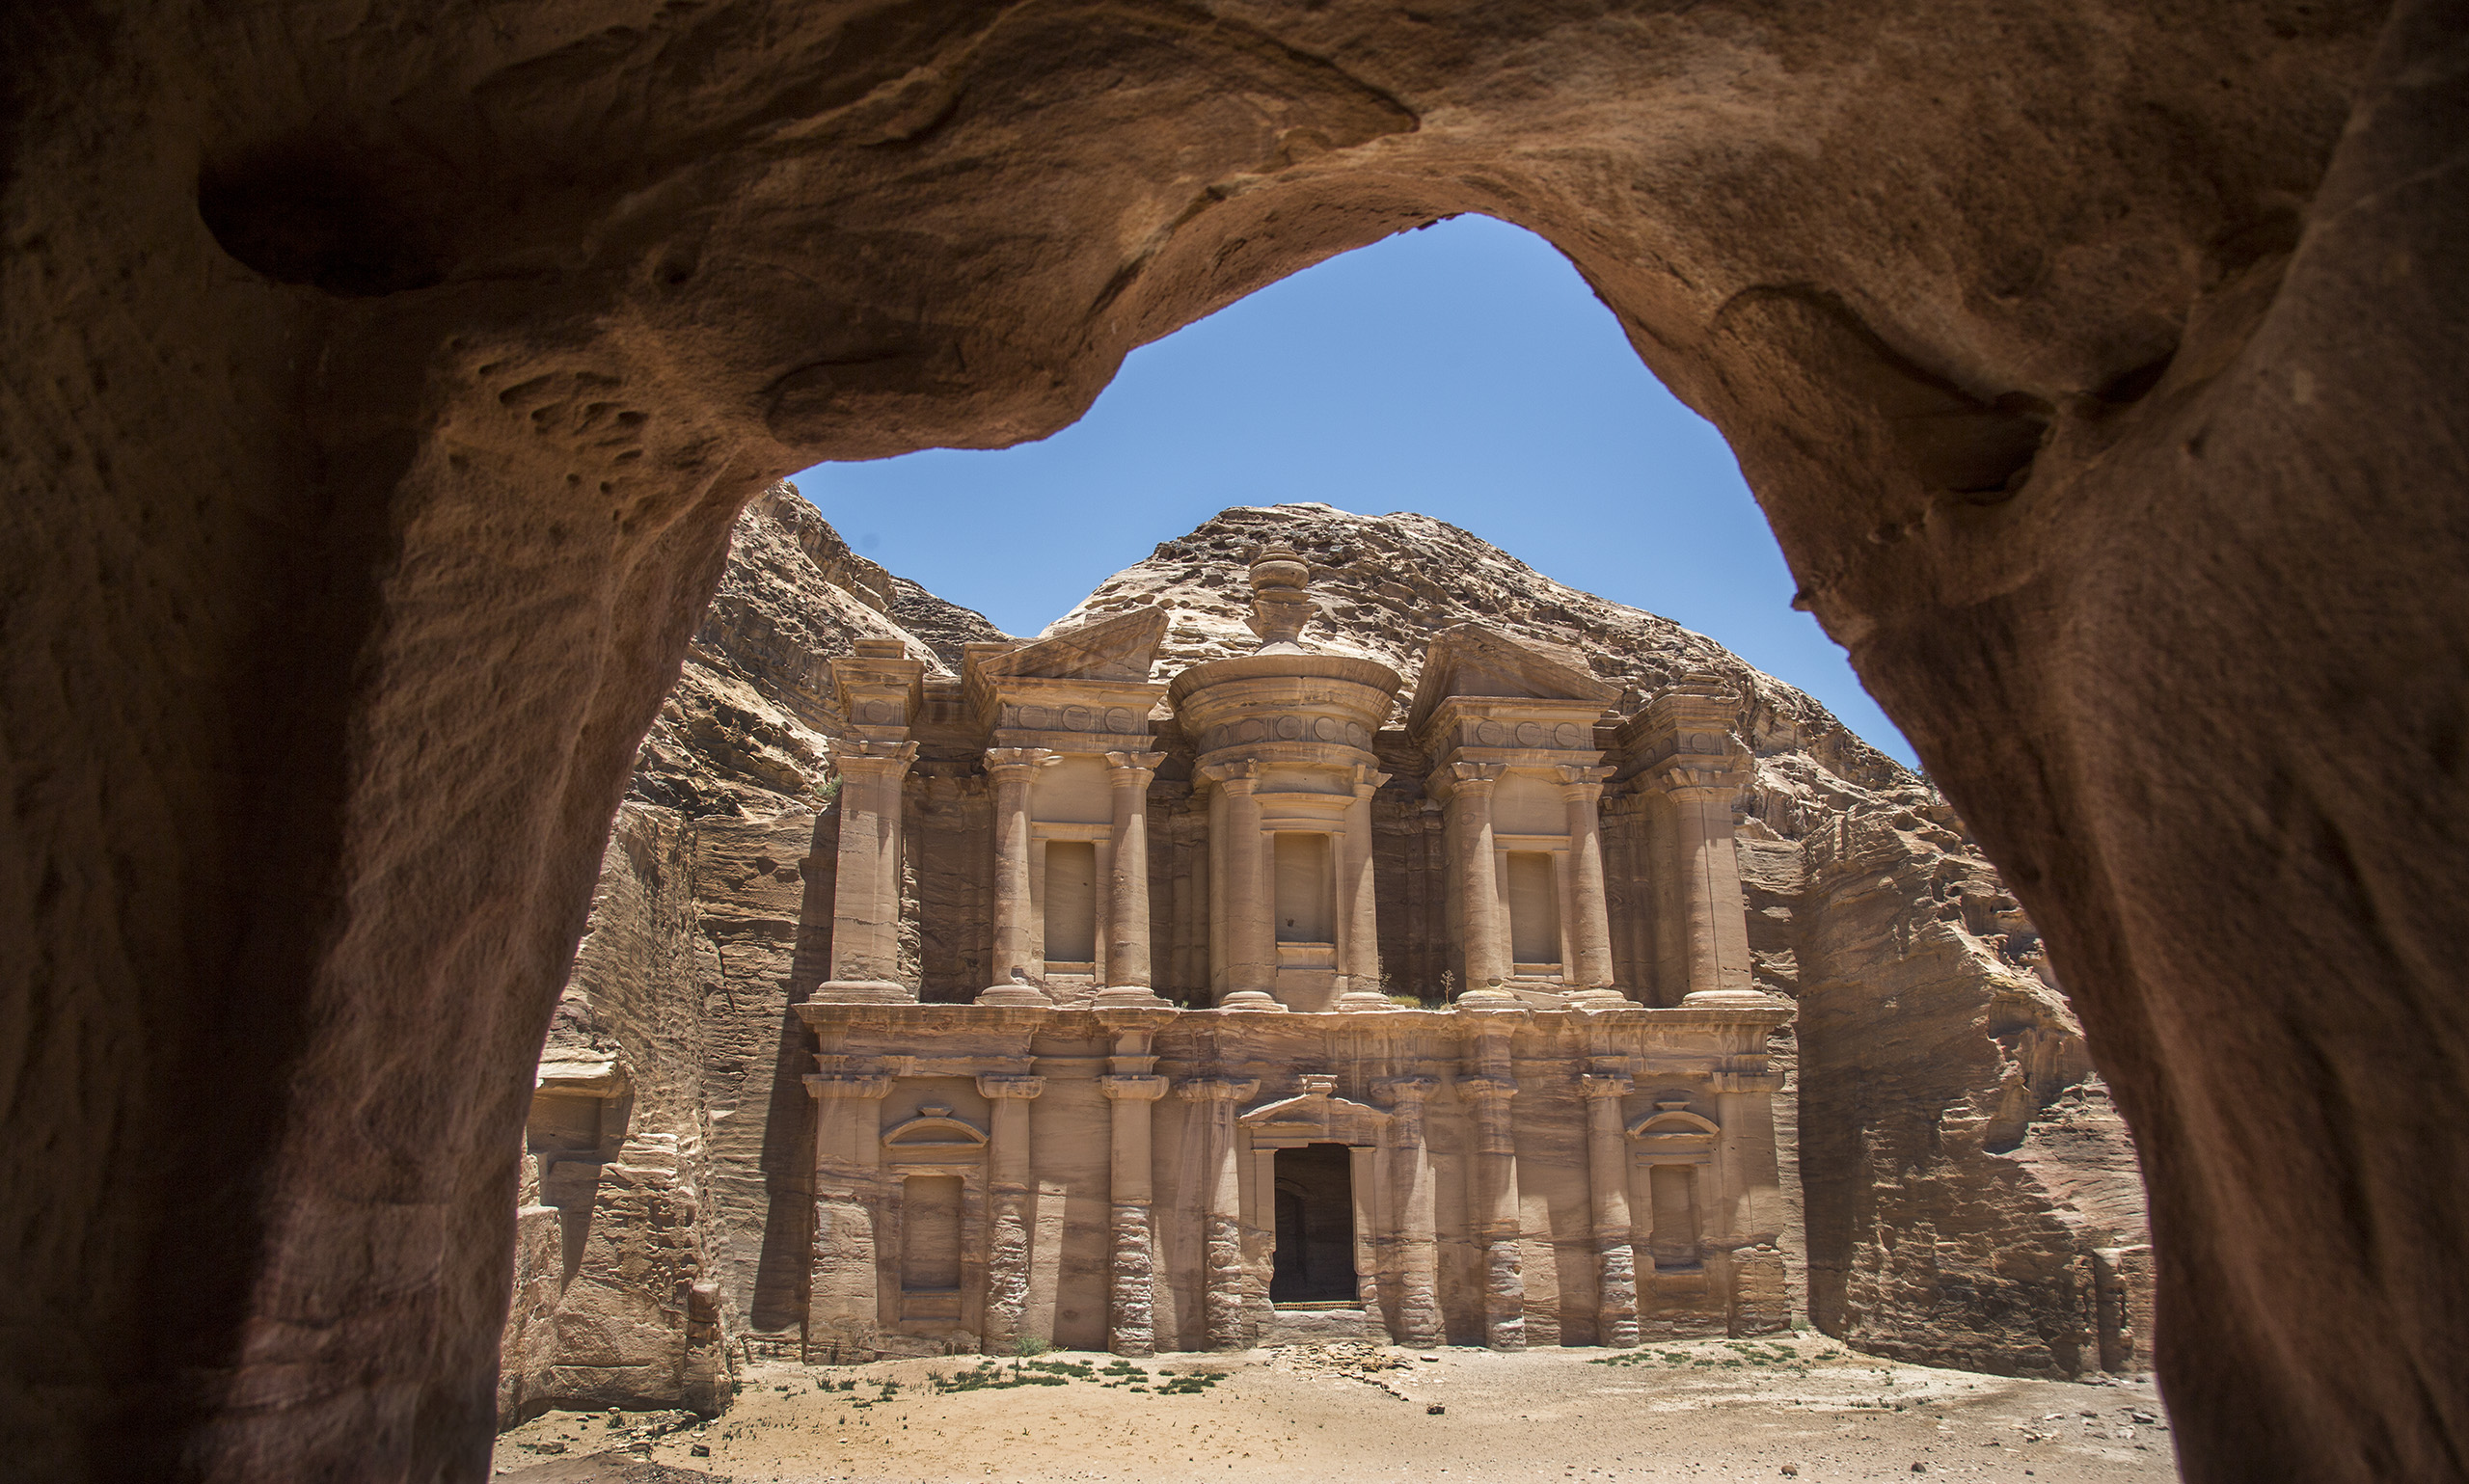 The Ad-Deir Monument and Plateau Project at Petra, Jordan.